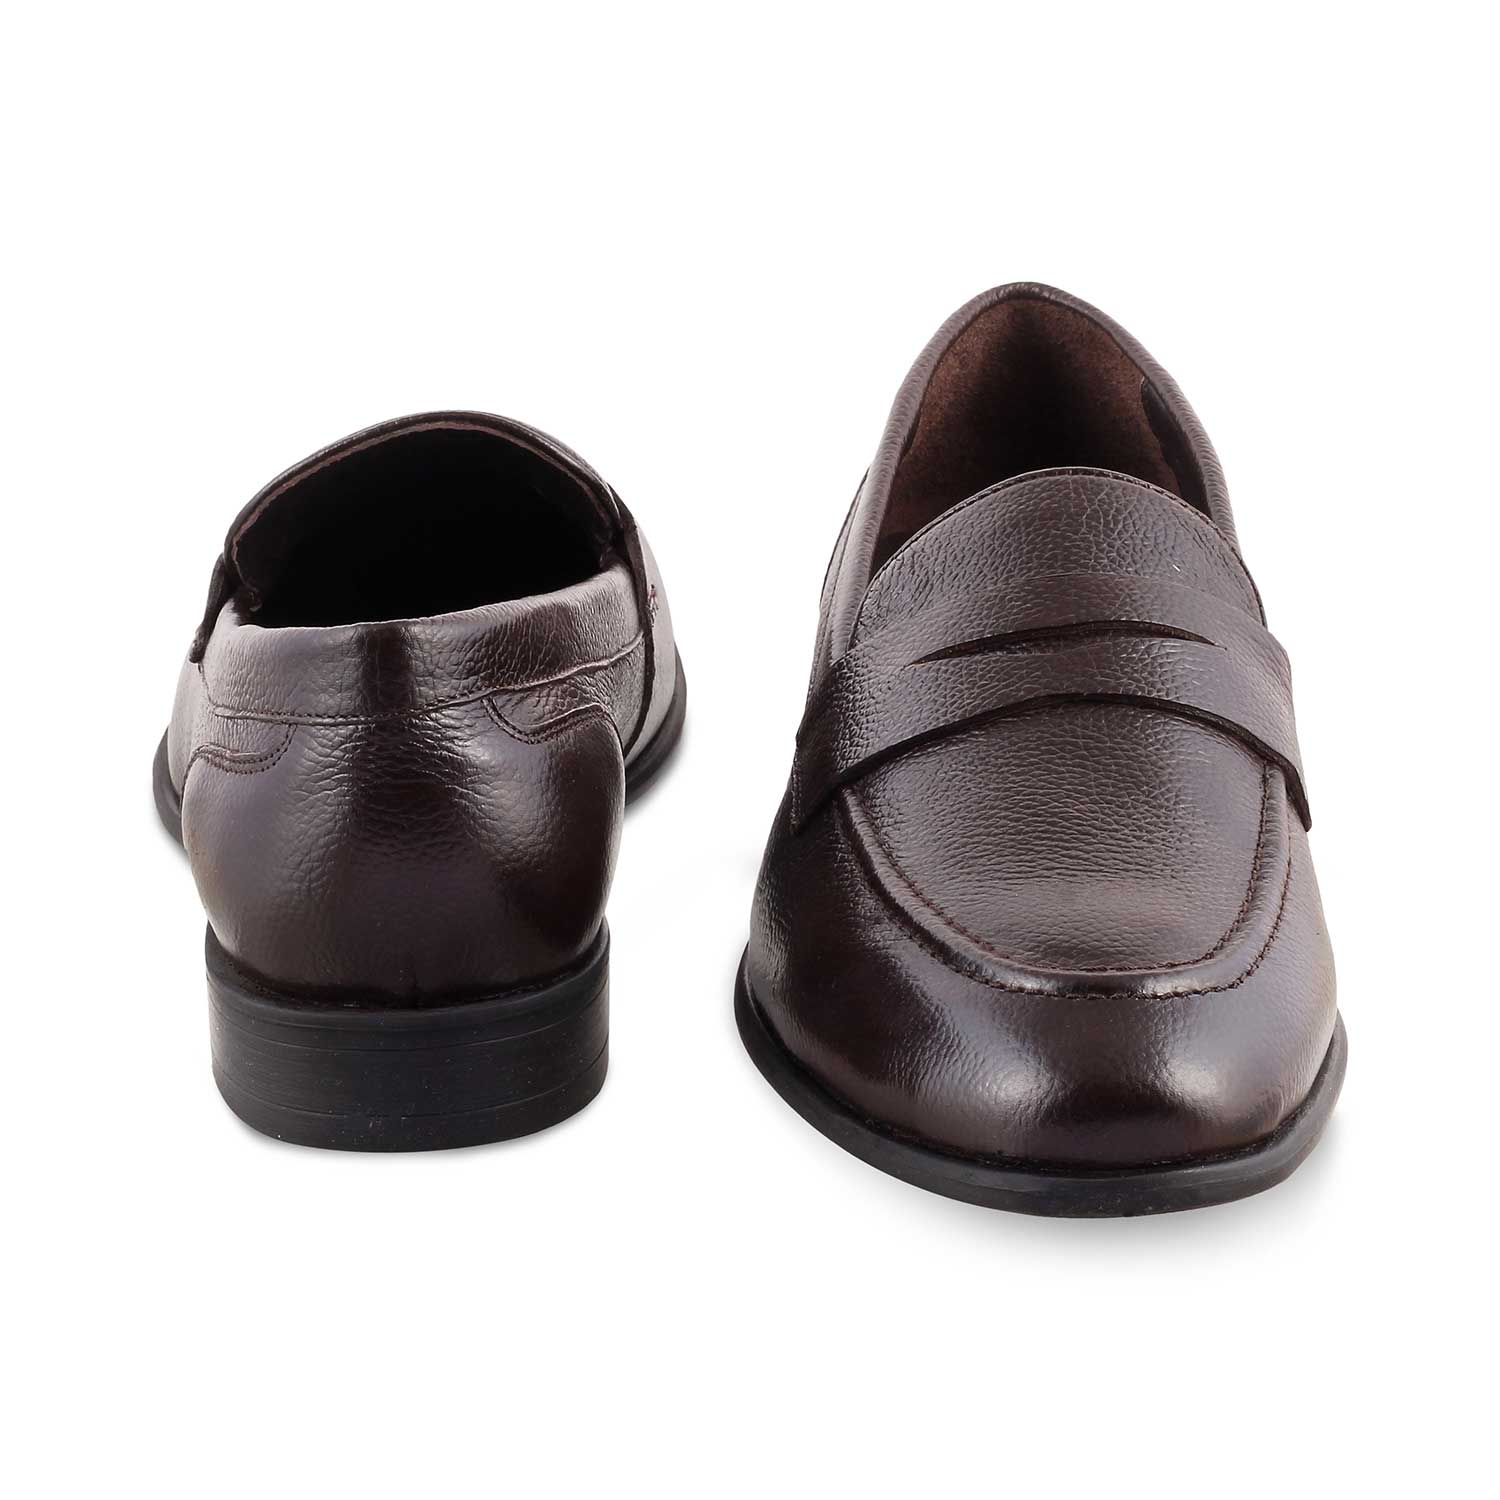 The Paris Brown Men's Leather Penny Loafers Tresmode - Tresmode